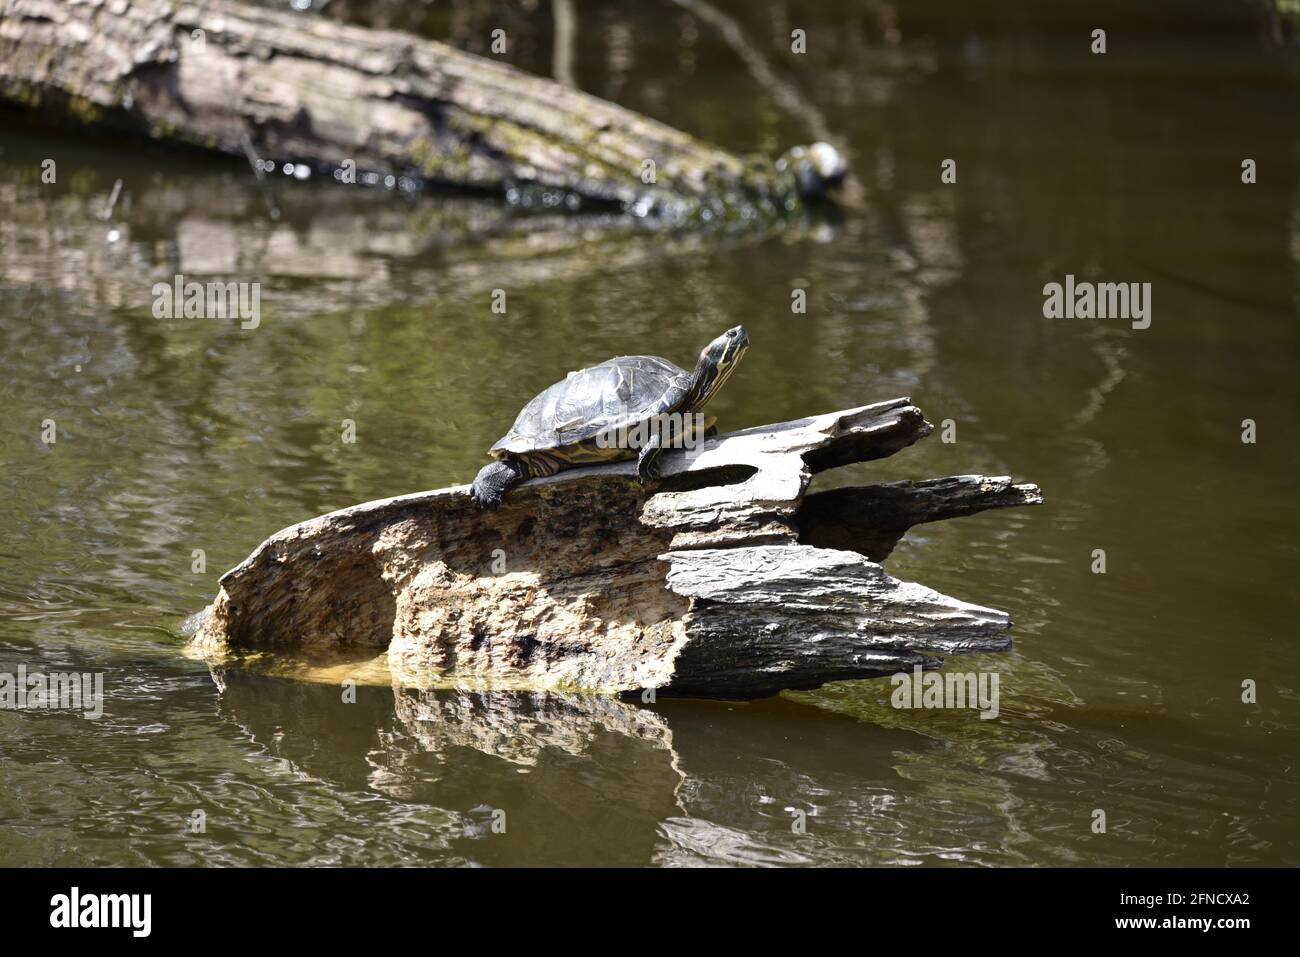 Terrapin Turtle (Malaclemys terrapia) On a Decaying Tree Log in the Middle of a Nature Reserve Lake in England in Spring Stock Photo